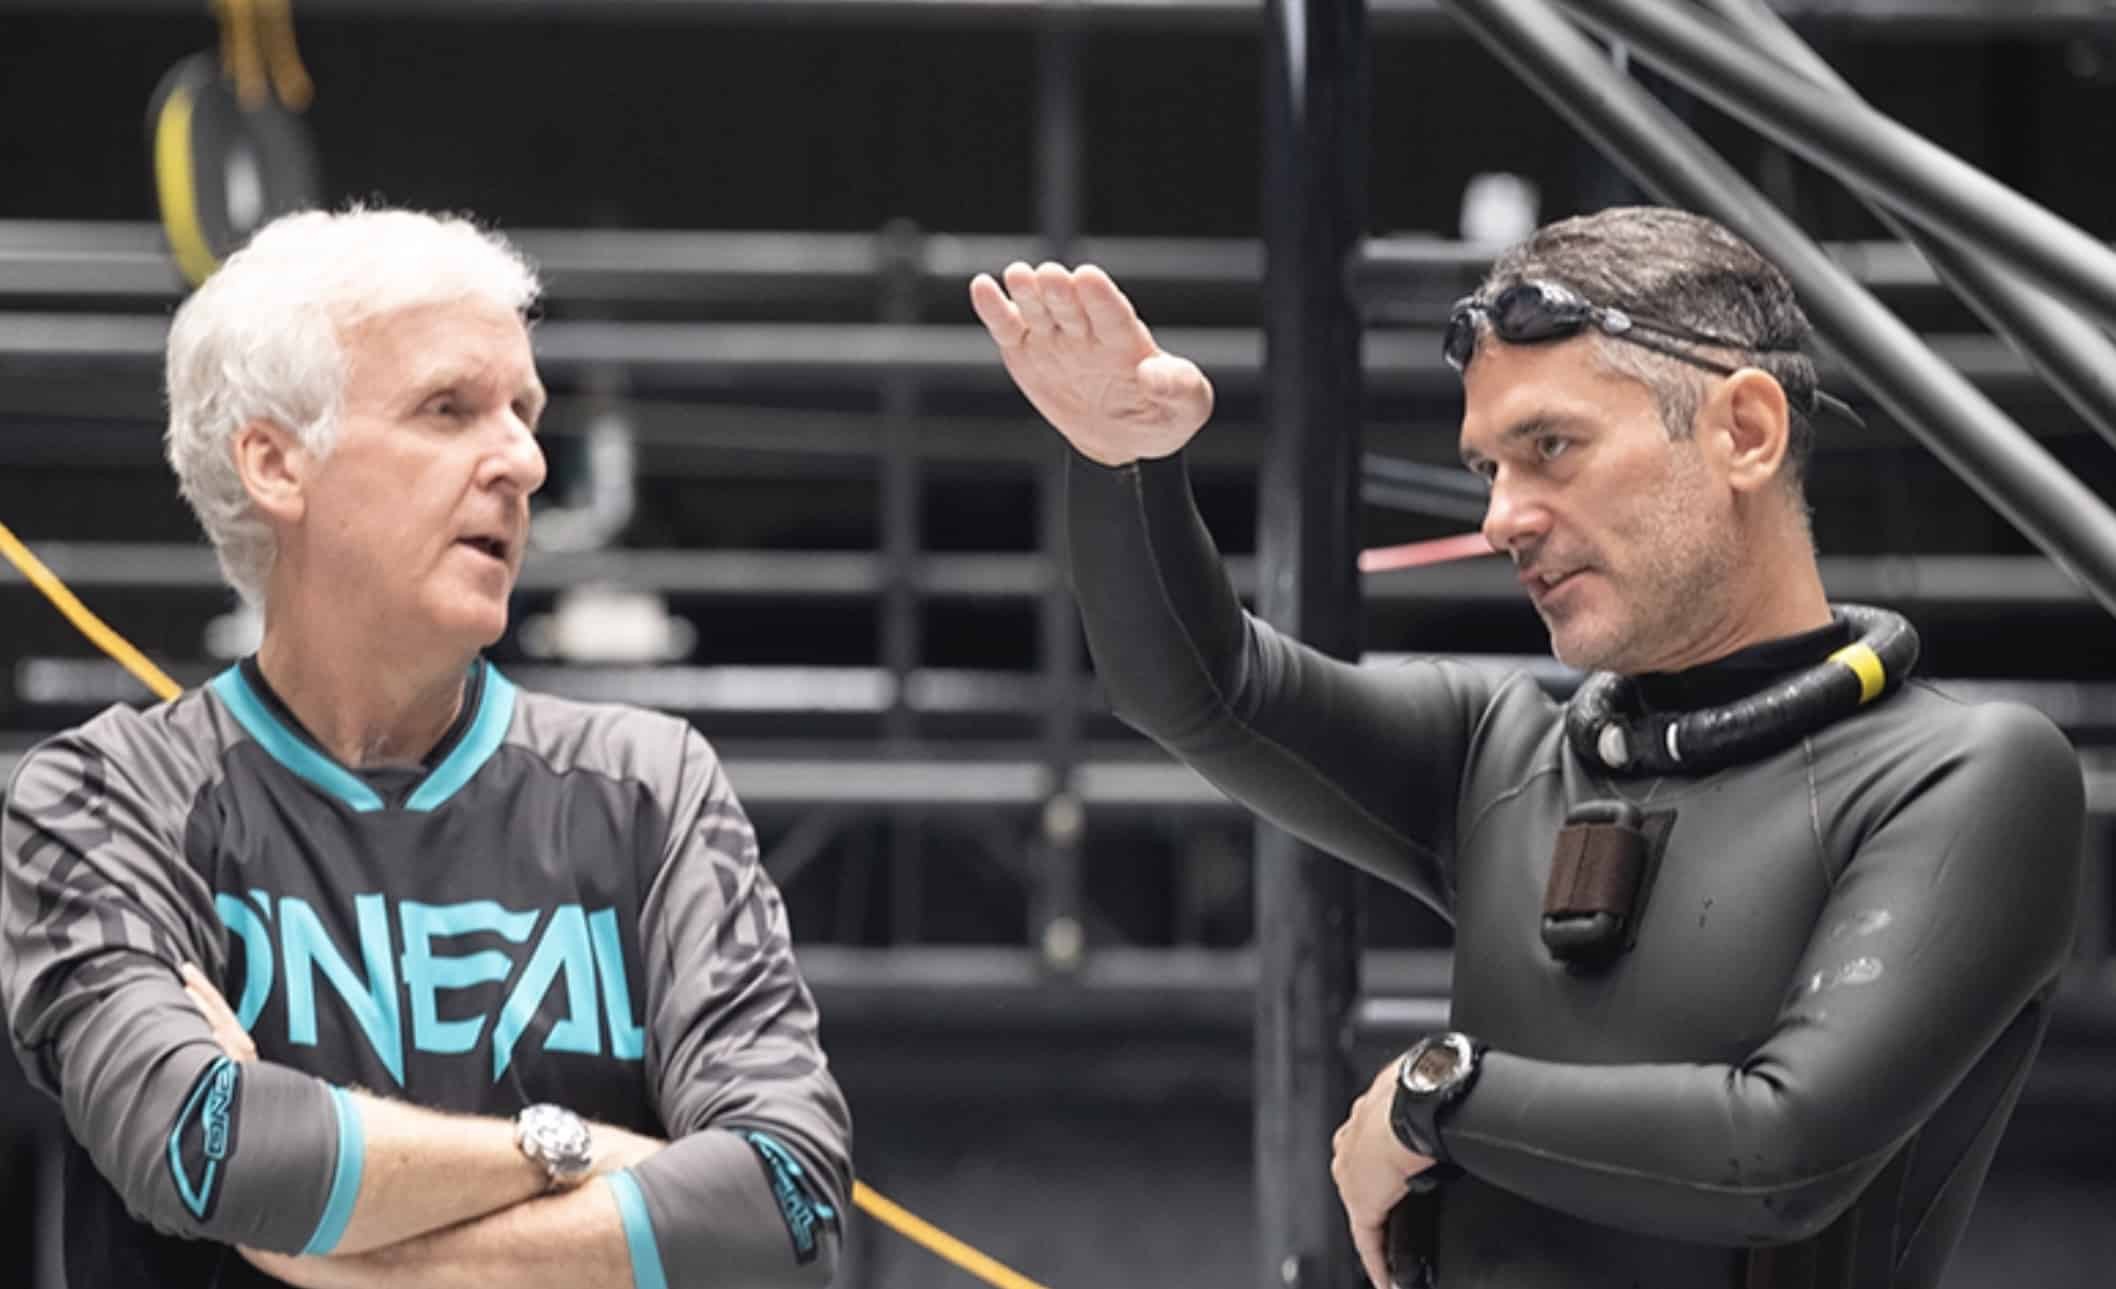 Director James Cameron and Kirk Krack on set during the filming the Avatar sequels.